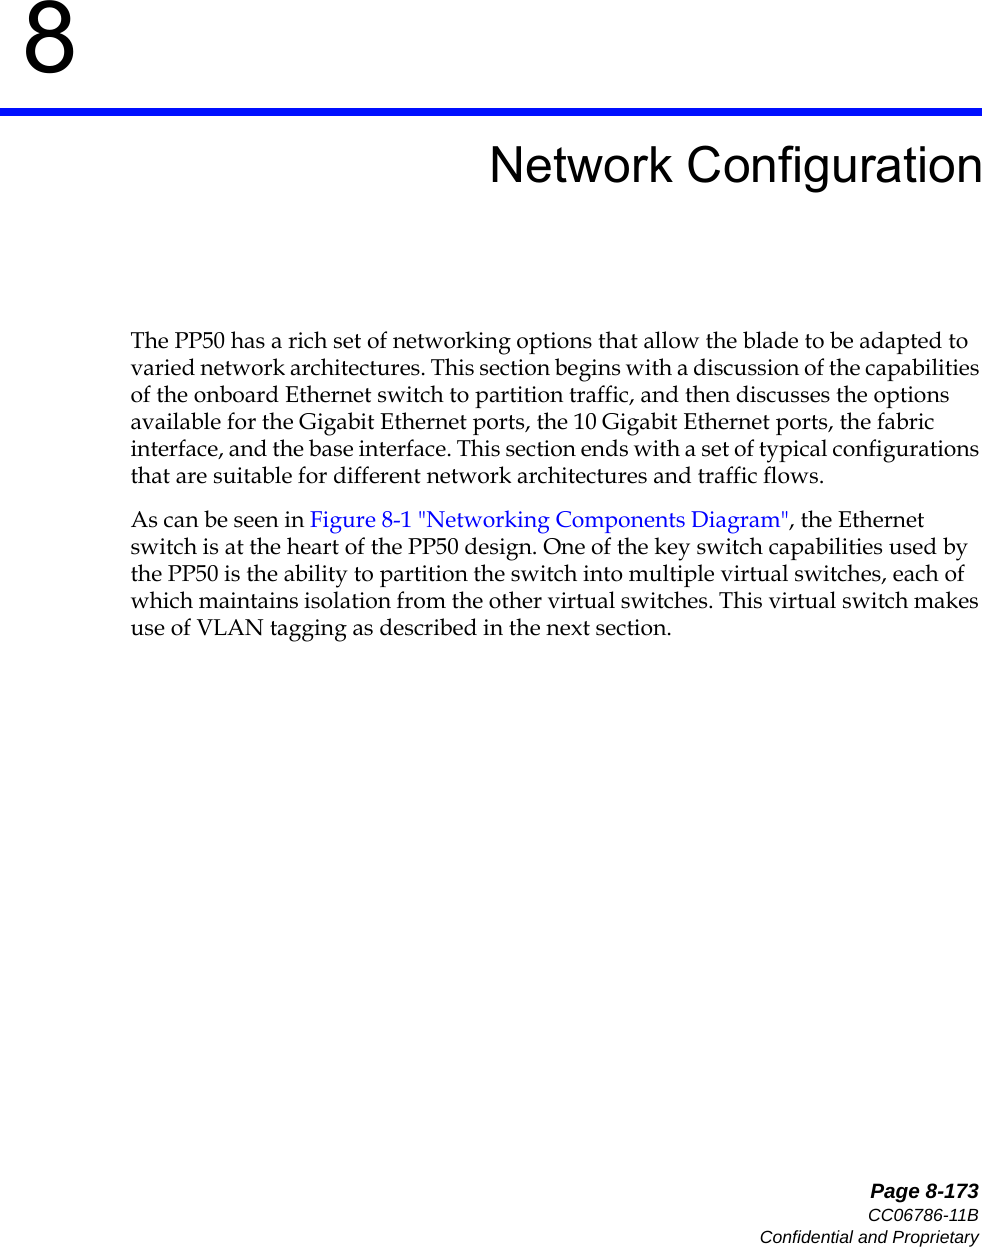   Page 8-173CC06786-11BConfidential and Proprietary8Preliminary8Network ConfigurationThe PP50 has a rich set of networking options that allow the blade to be adapted to varied network architectures. This section begins with a discussion of the capabilities of the onboard Ethernet switch to partition traffic, and then discusses the options available for the Gigabit Ethernet ports, the 10 Gigabit Ethernet ports, the fabric interface, and the base interface. This section ends with a set of typical configurations that are suitable for different network architectures and traffic flows.As can be seen in Figure 8-1 &quot;Networking Components Diagram&quot;, the Ethernet switch is at the heart of the PP50 design. One of the key switch capabilities used by the PP50 is the ability to partition the switch into multiple virtual switches, each of which maintains isolation from the other virtual switches. This virtual switch makes use of VLAN tagging as described in the next section.